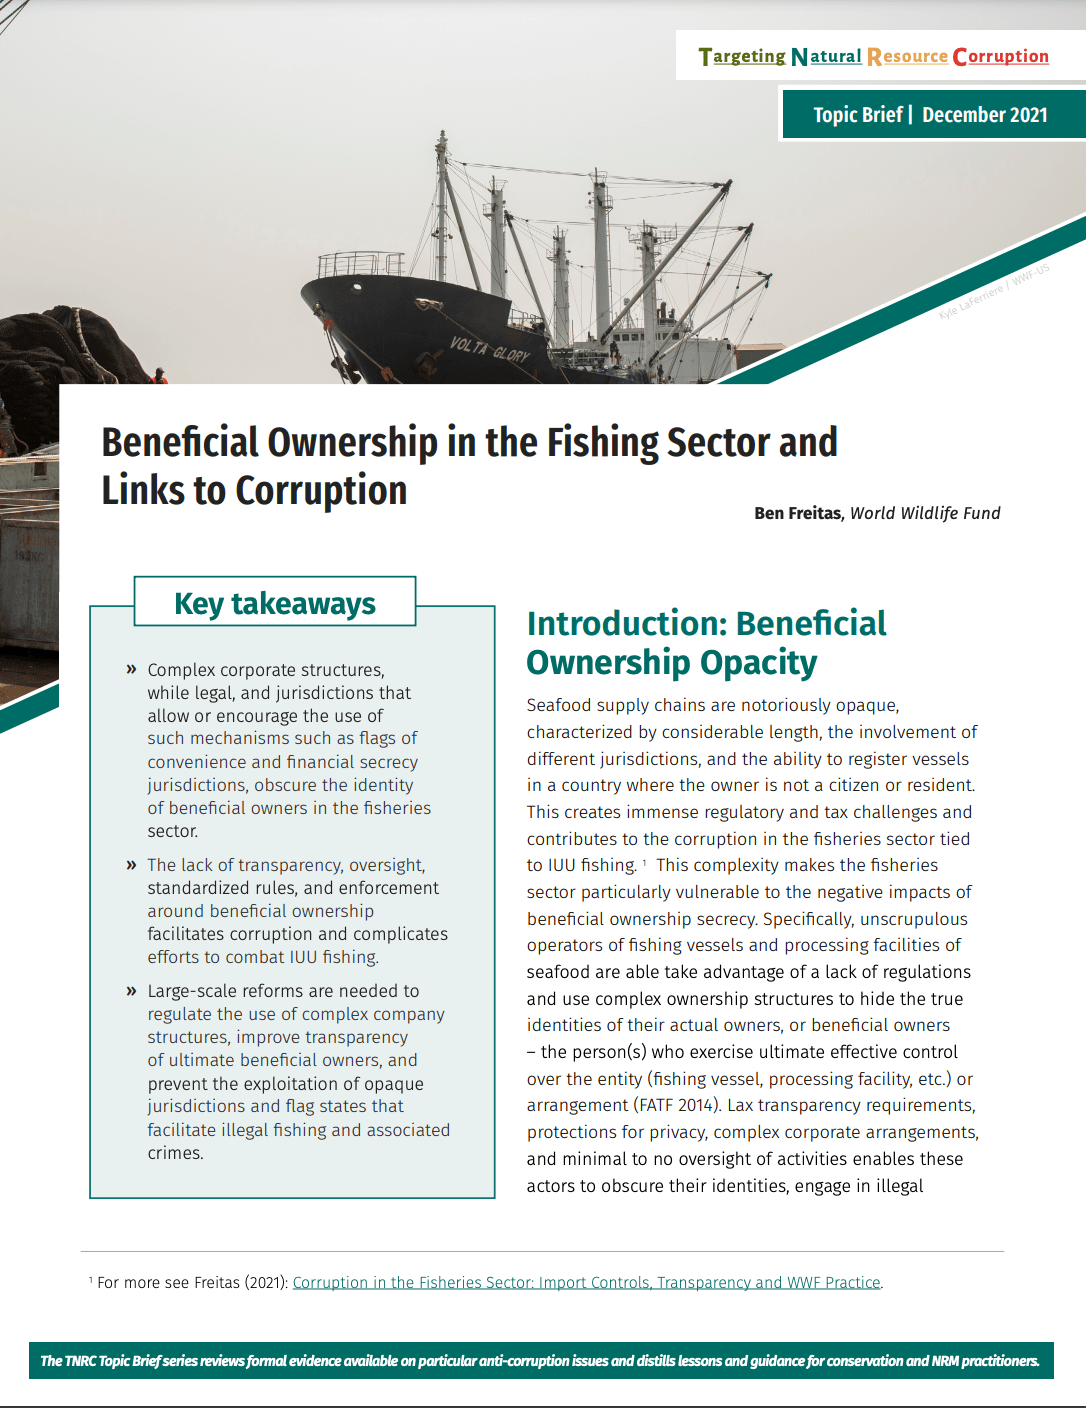 Beneficial Ownership in the Fishing Sector and Links to Corruption